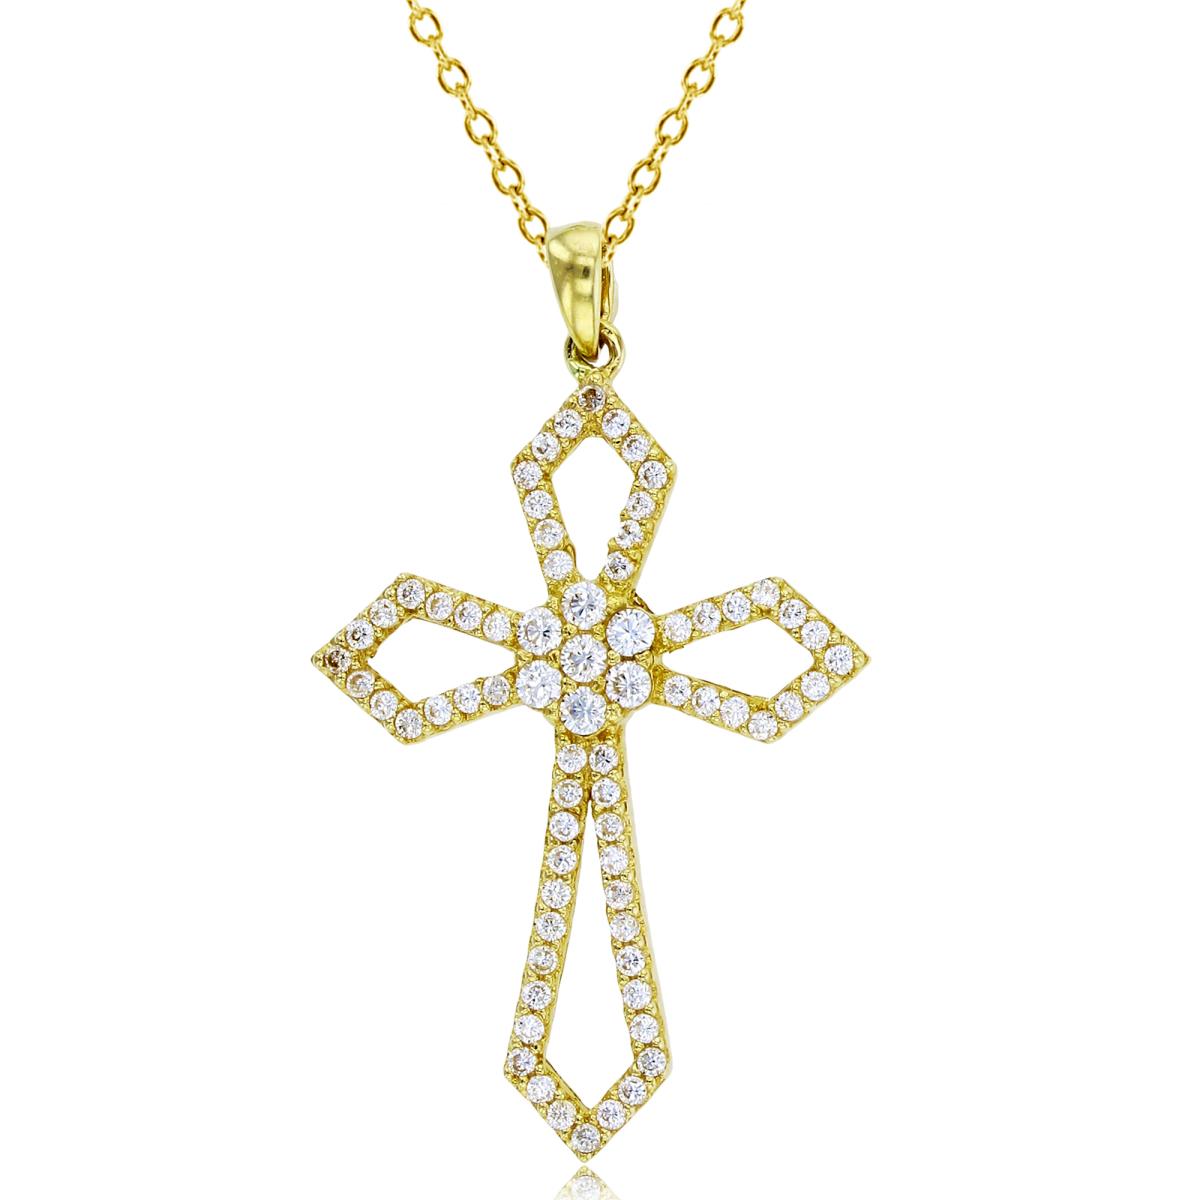 10K Yellow Gold Paved Cross 18"Necklace